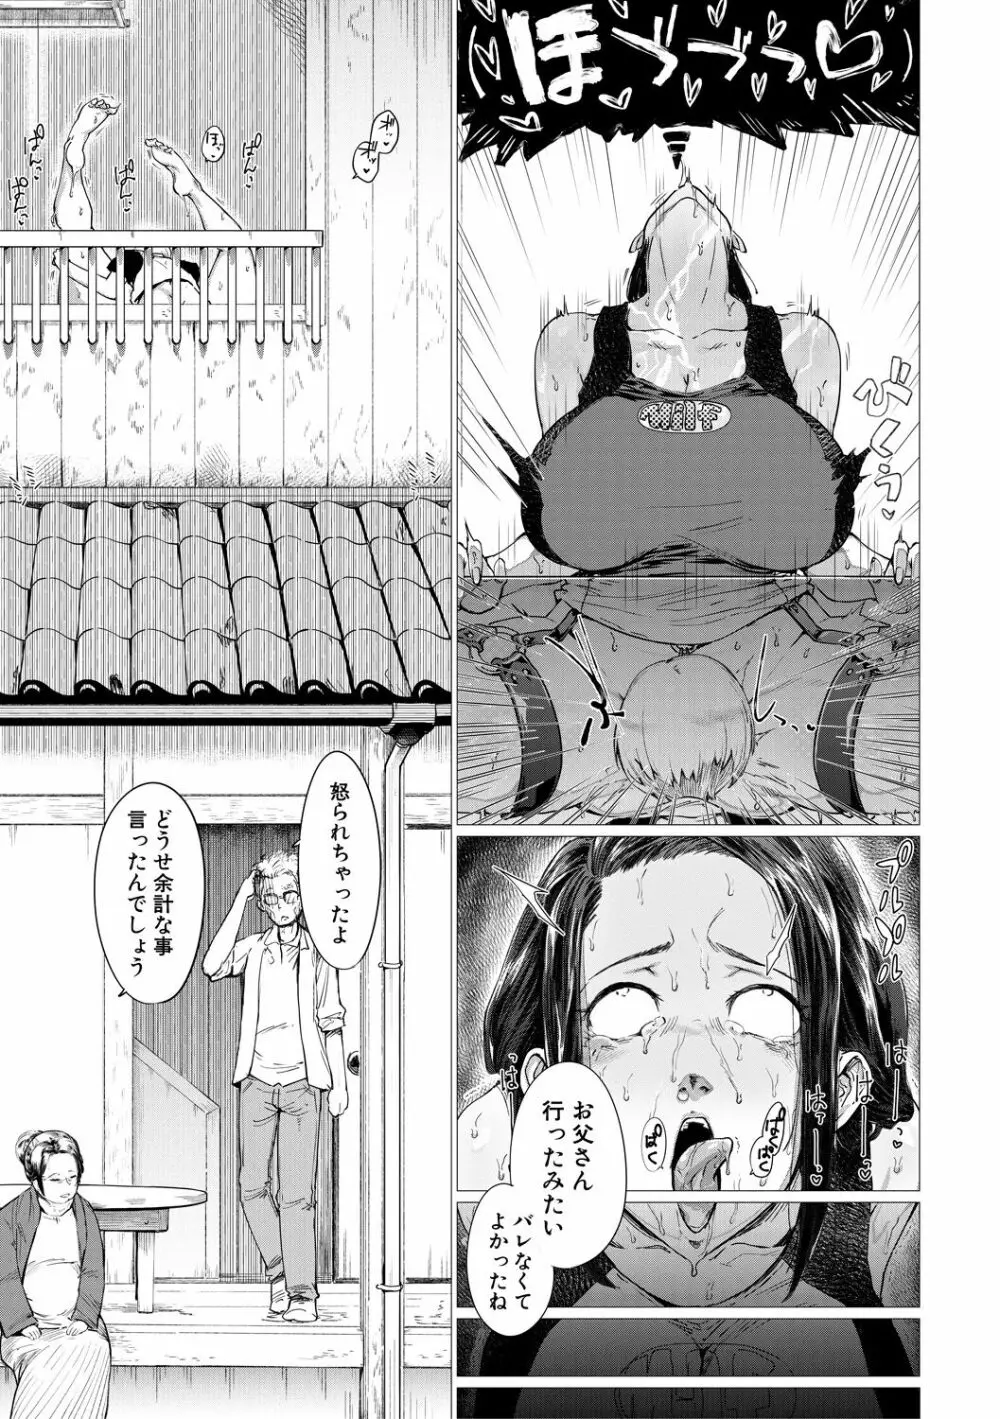 Countryside Toy～田舎でオモチャ～ - page9